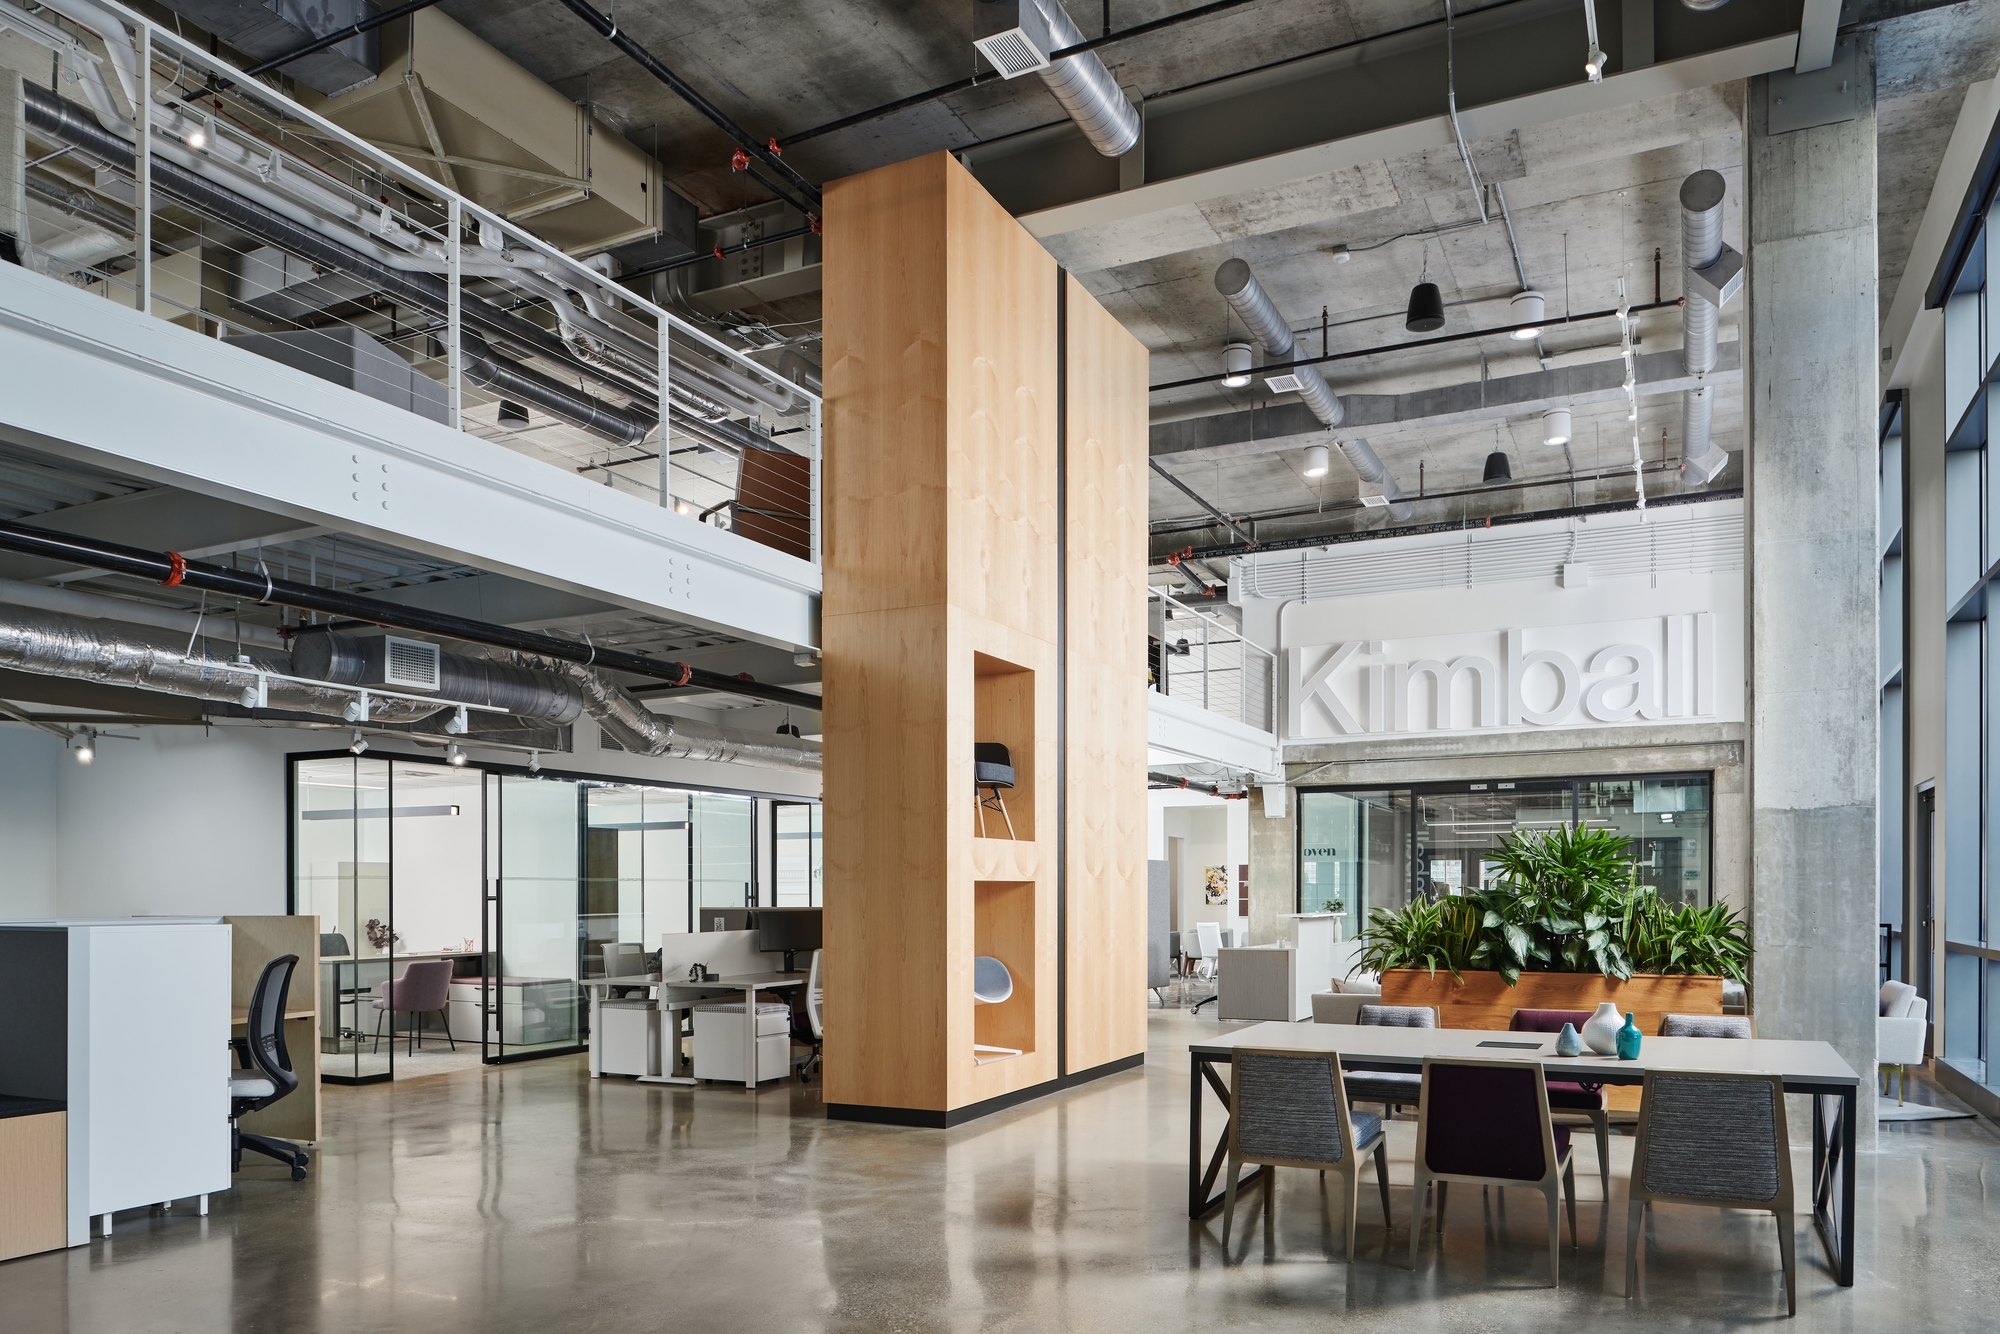 Kimball Offices and Showroom - Dallas | Office Snapshots